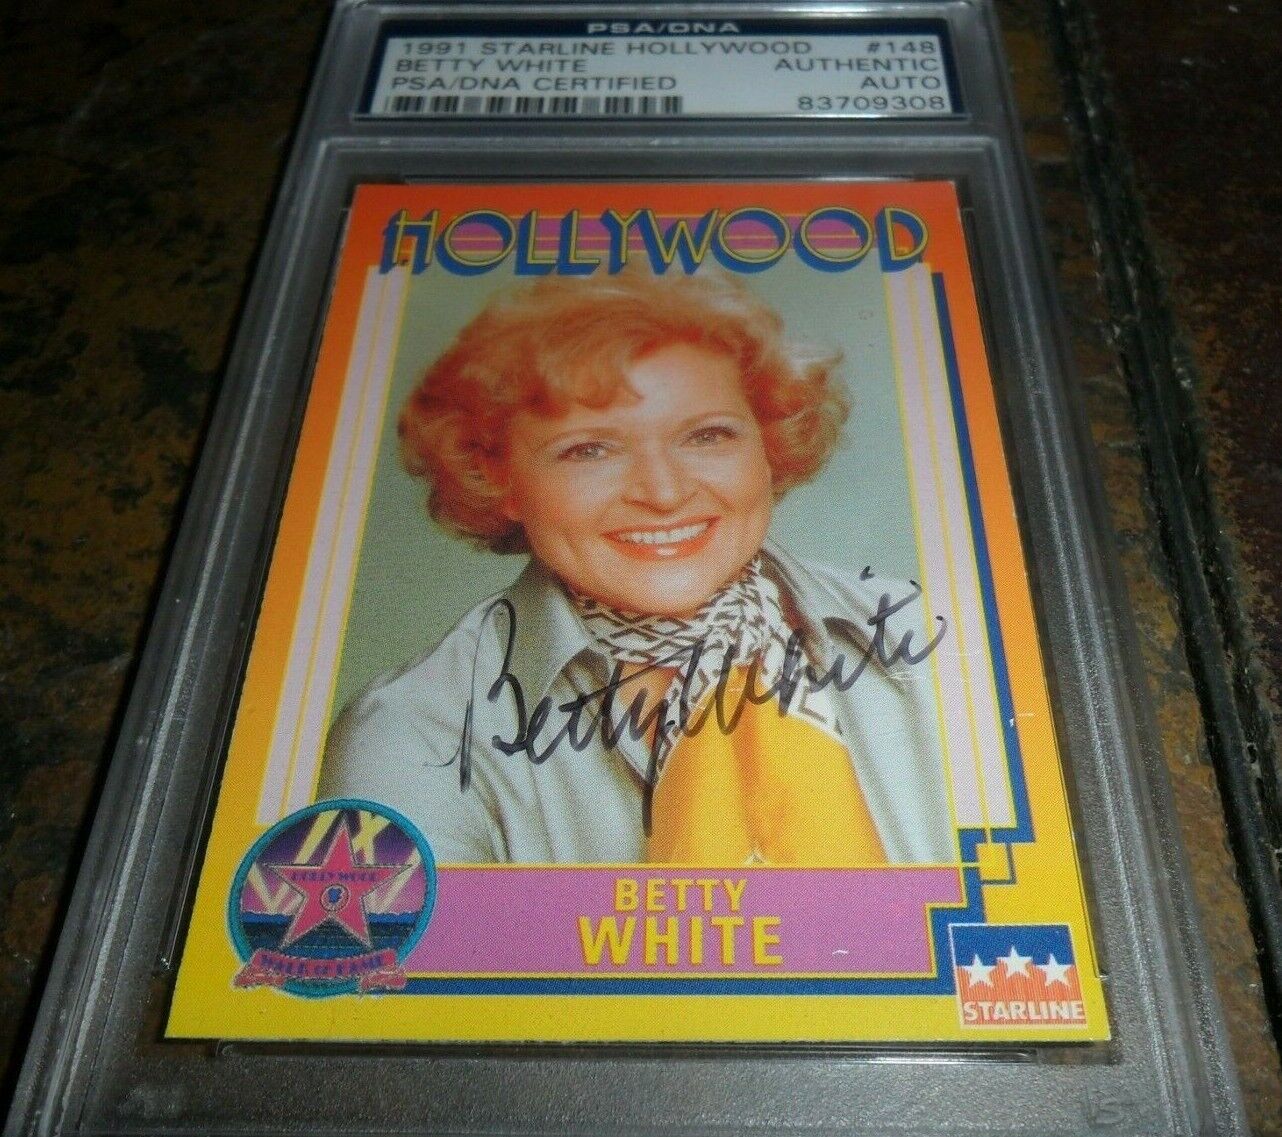 BETTY WHITE Golden Girls Signed 1991 Starline HOLLYWOOD Card AUTOGRAPH PSA/DNA 